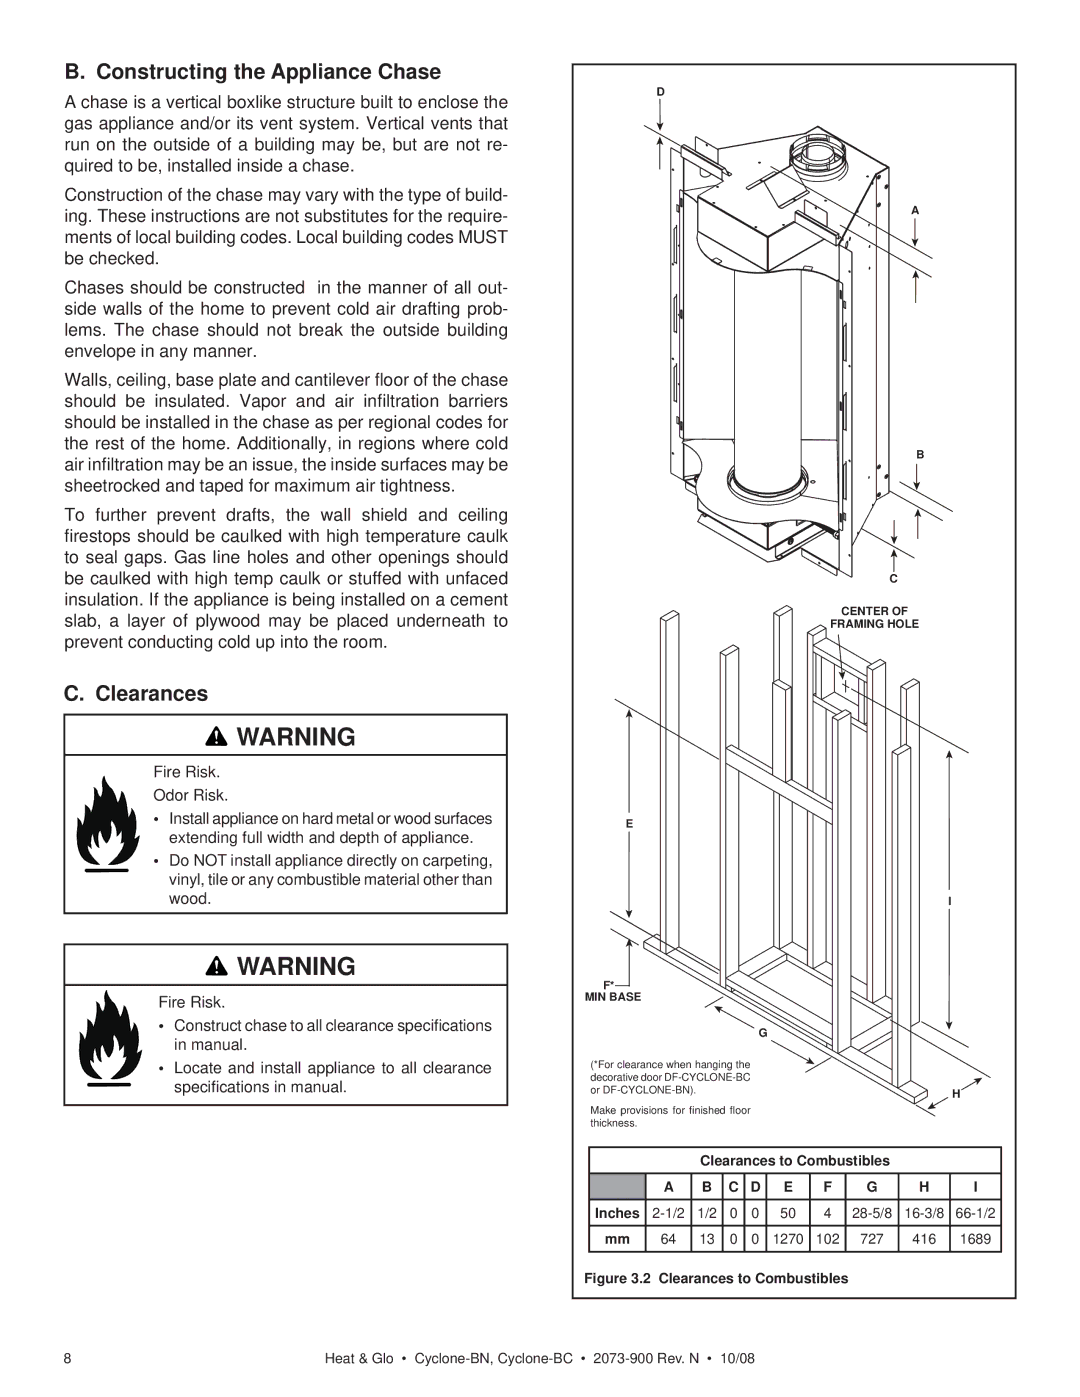 Hearth and Home Technologies Cyclone-BC, Cyclone-BN owner manual Constructing the Appliance Chase, Clearances 